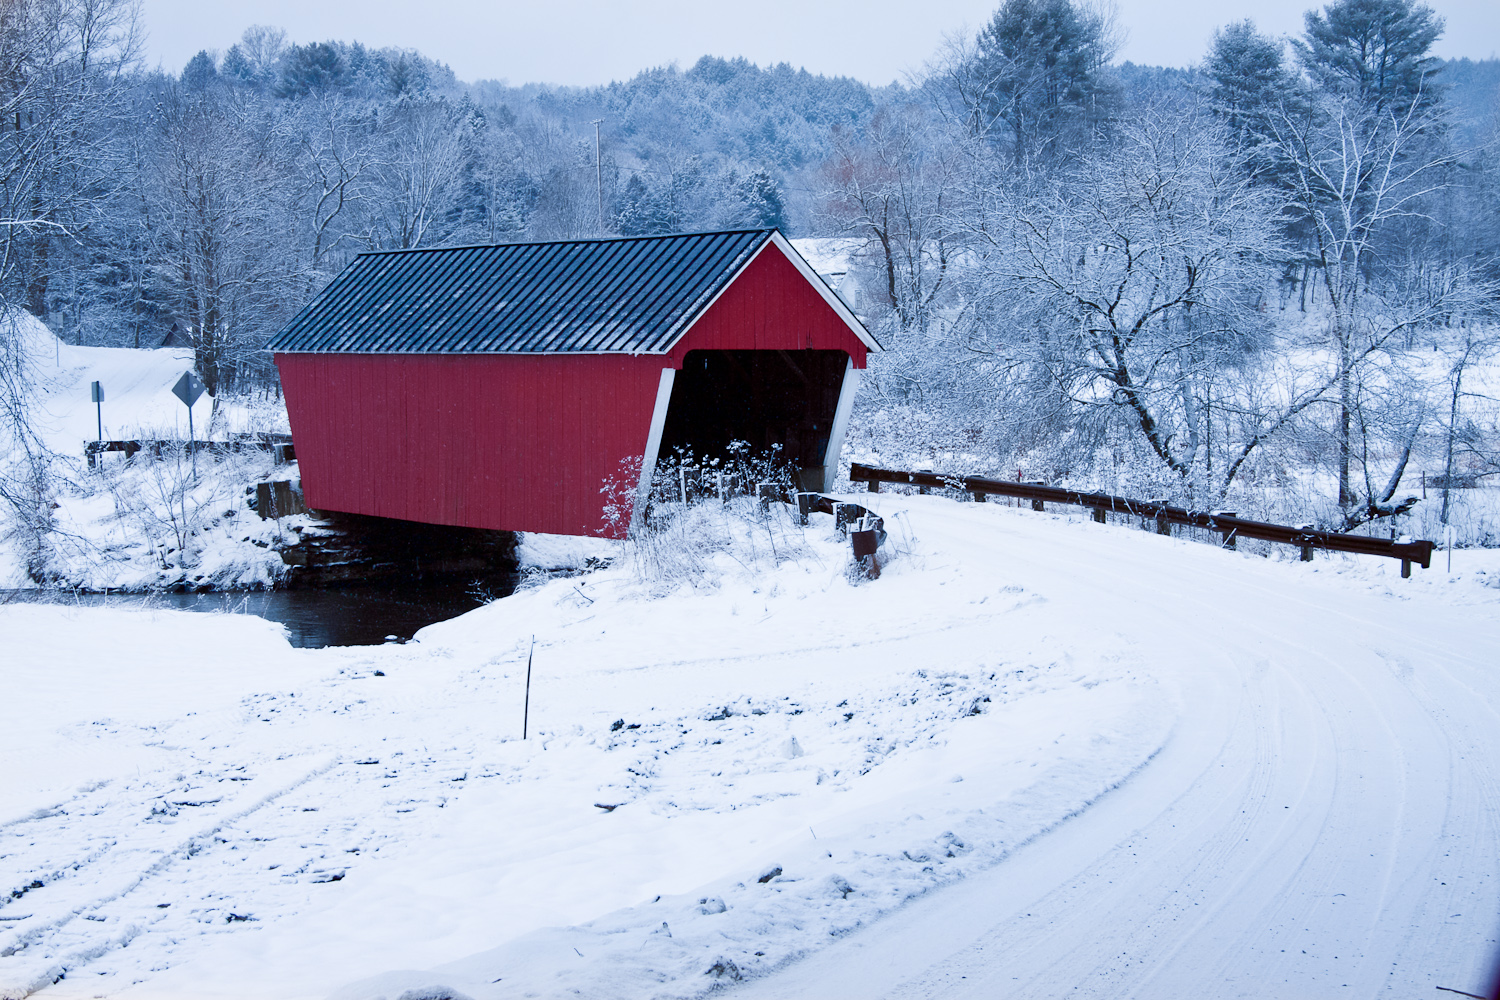 Vermont Covered Bridge In Snow #2 (user submitted)